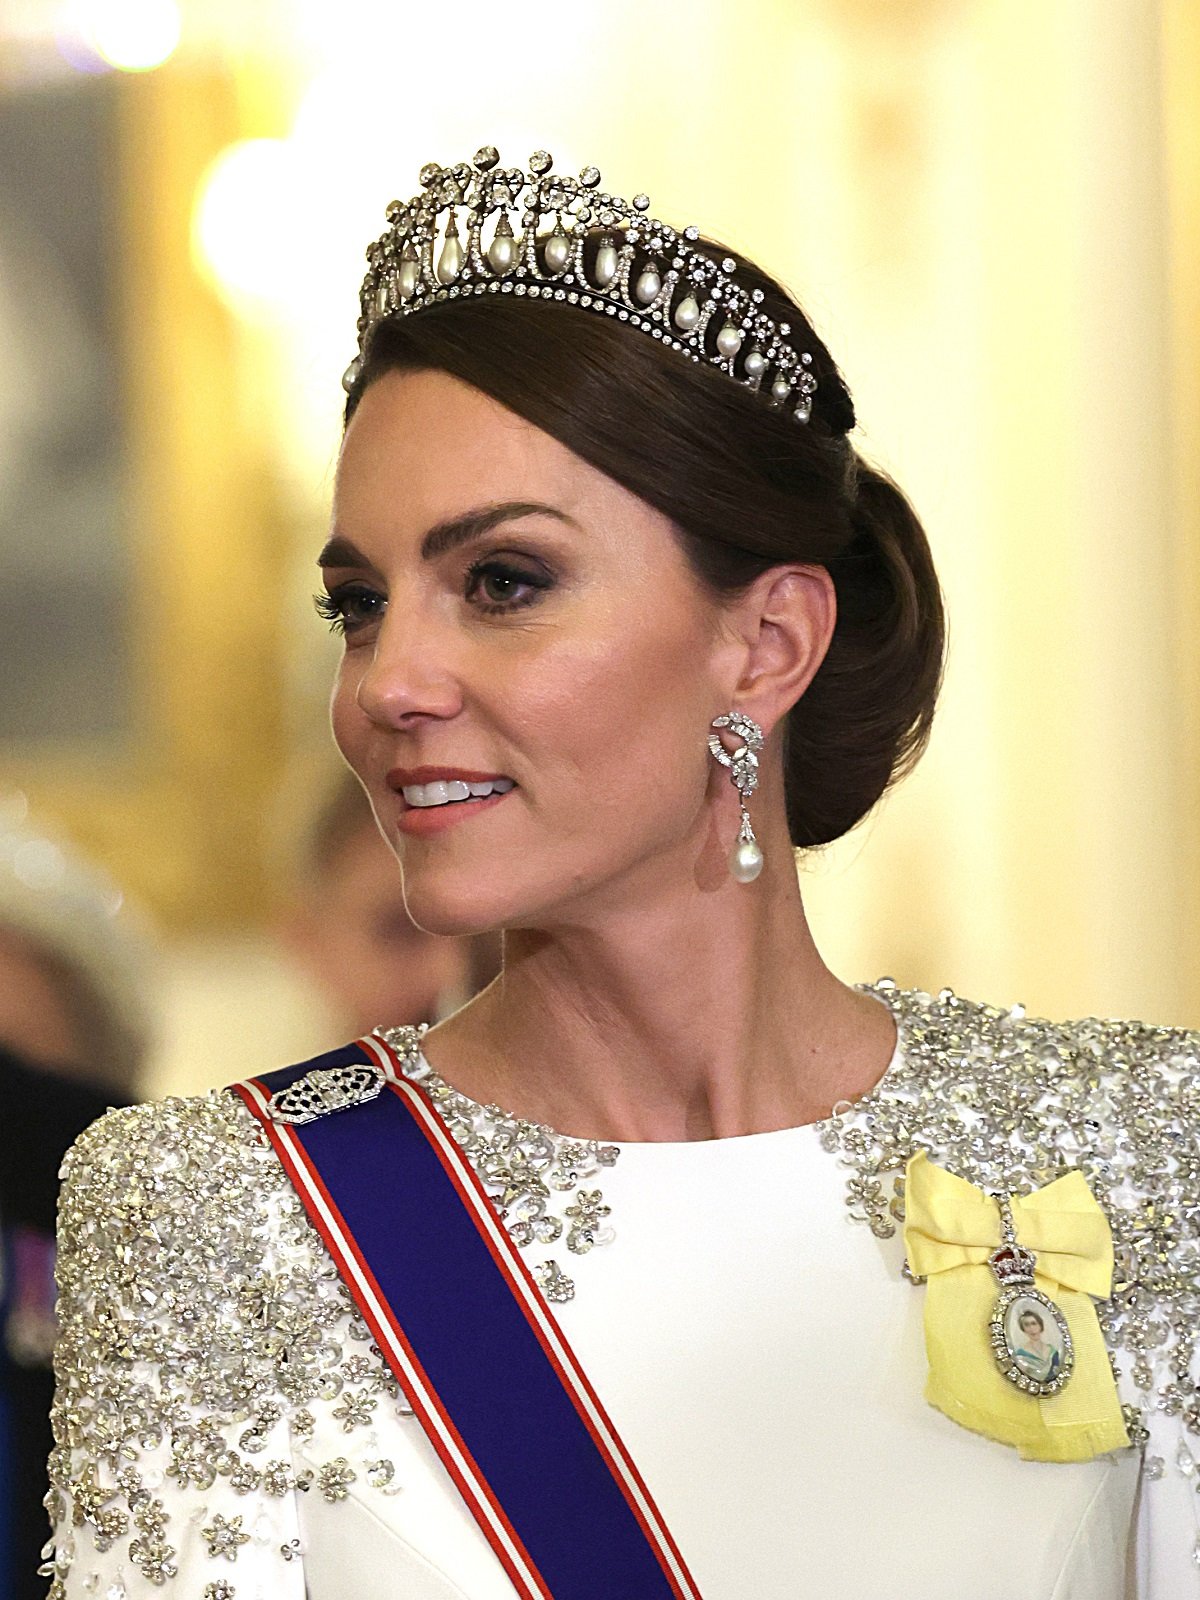 Kate Middleton photographed during the State Banquet at Buckingham Palace